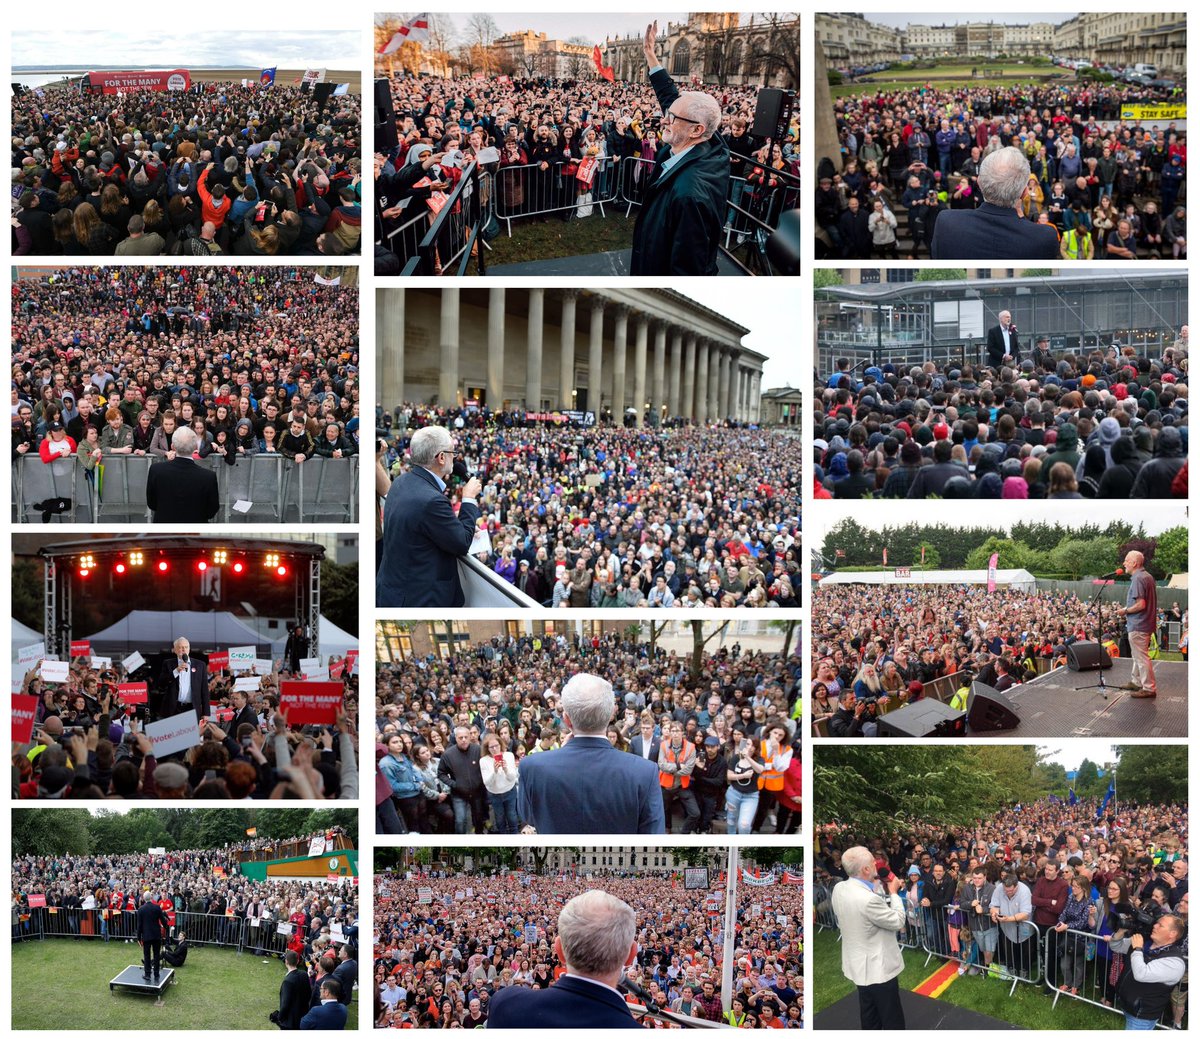 @adammaanit This is mine. 
Thousands & thousands. Queues around the block to hear the man speak at venues up & down the land.
Now you show me that cordoned off corner in an aircraft hangar, or the Irish Embassy Party or anything you like that doesn't show this level of support.
#ItWasAScam